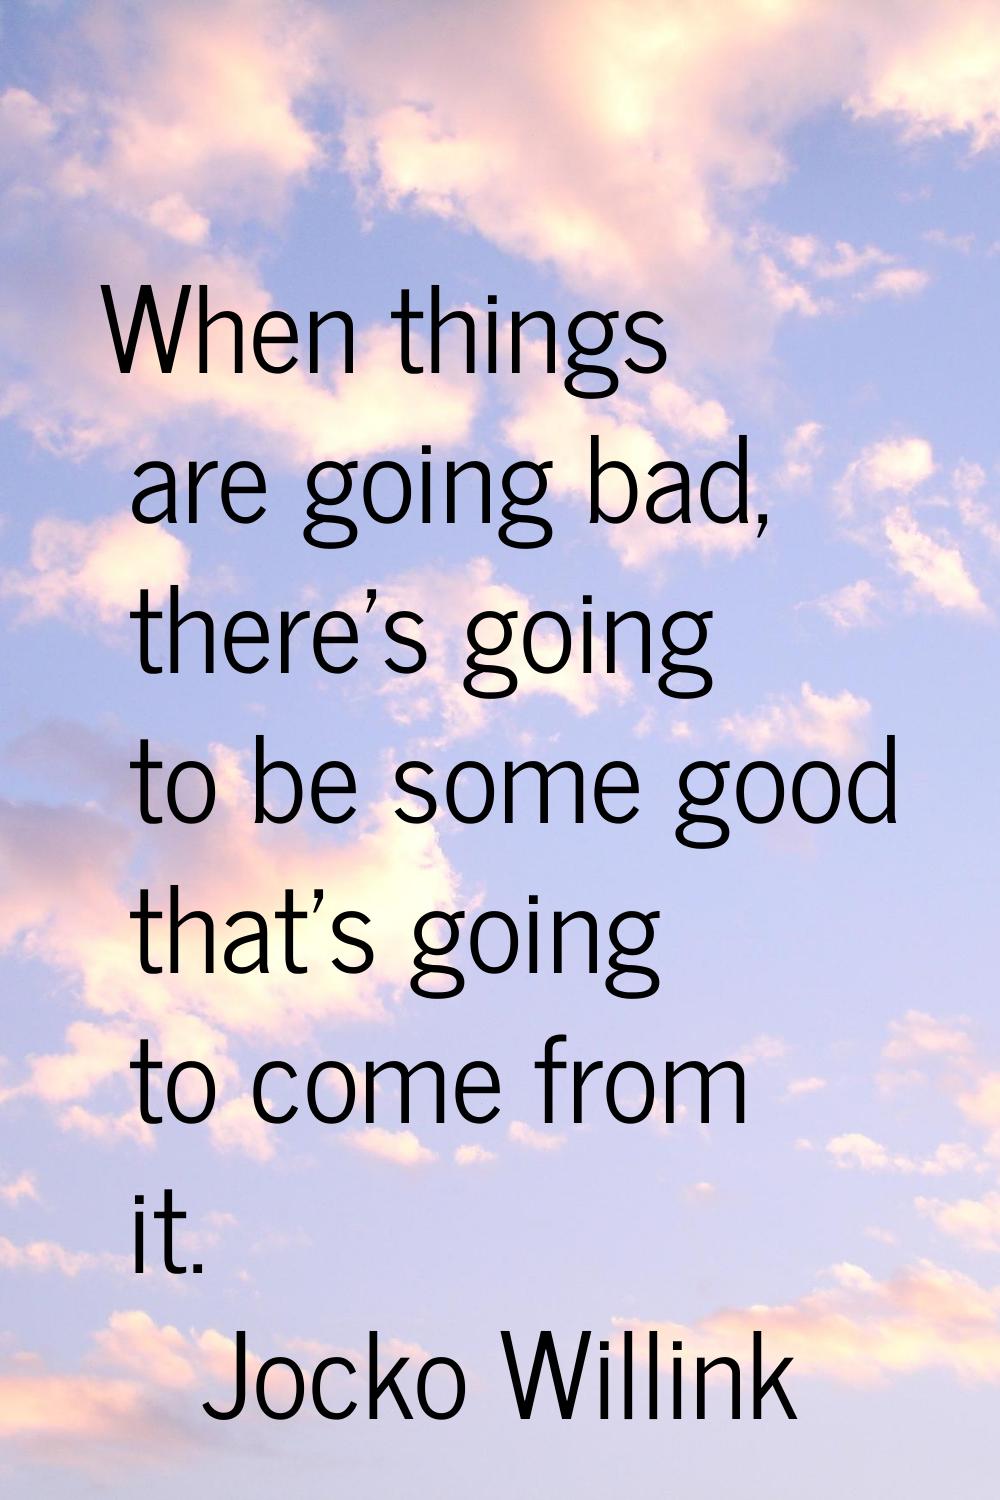 When things are going bad, there's going to be some good that's going to come from it.